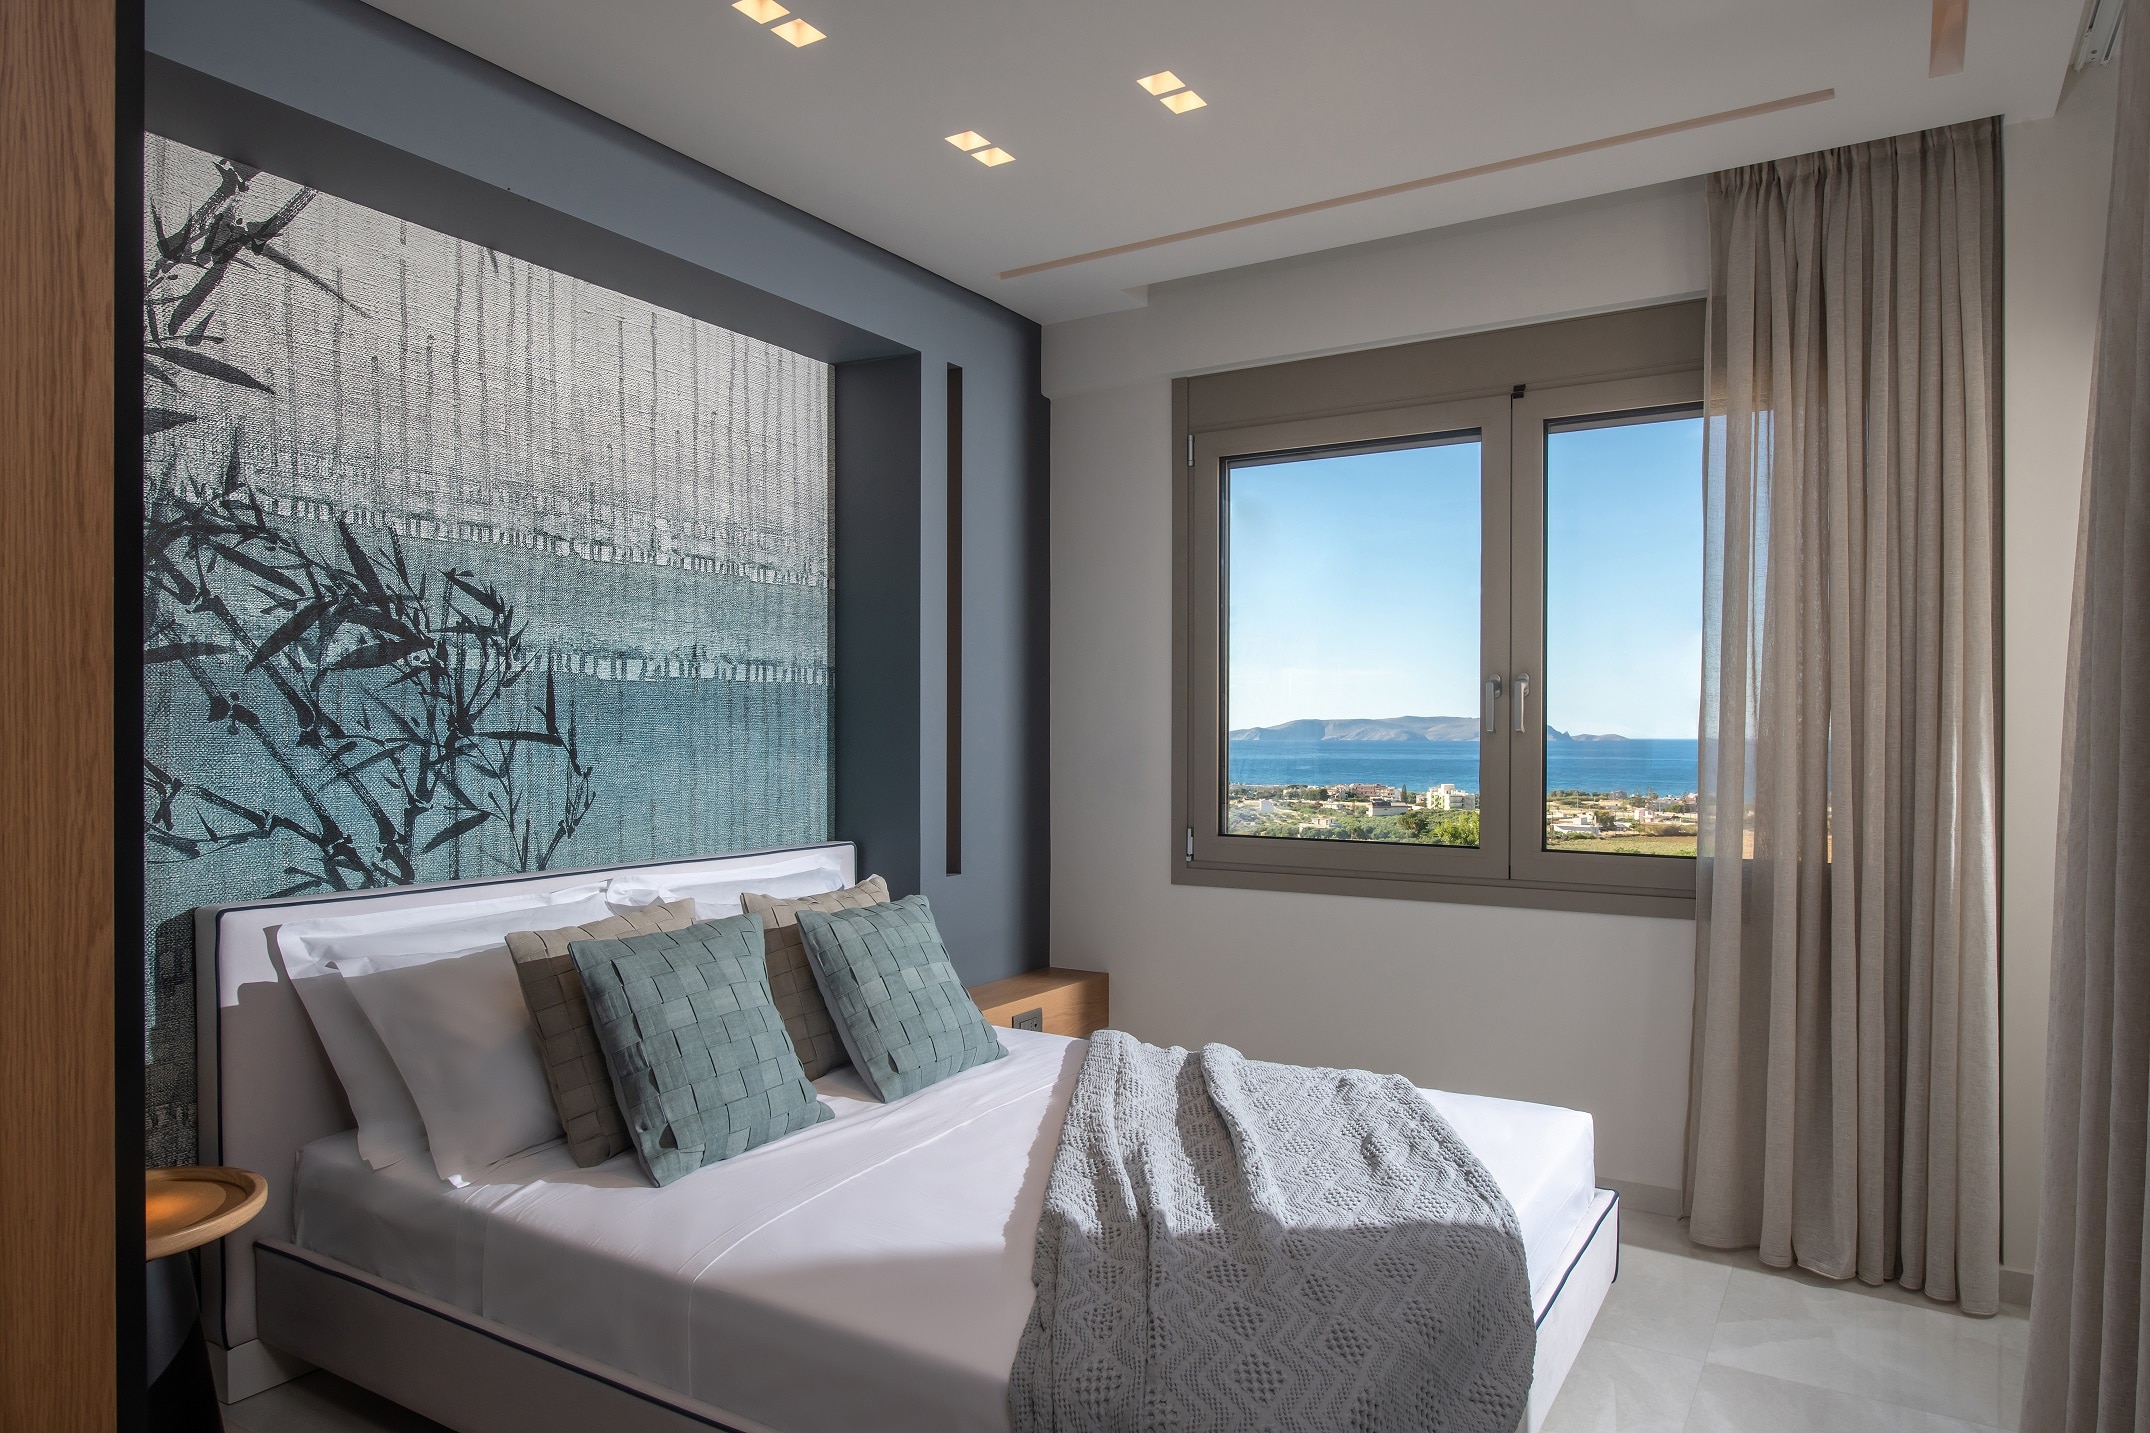 KYMO Instyle Villa bedroom and view